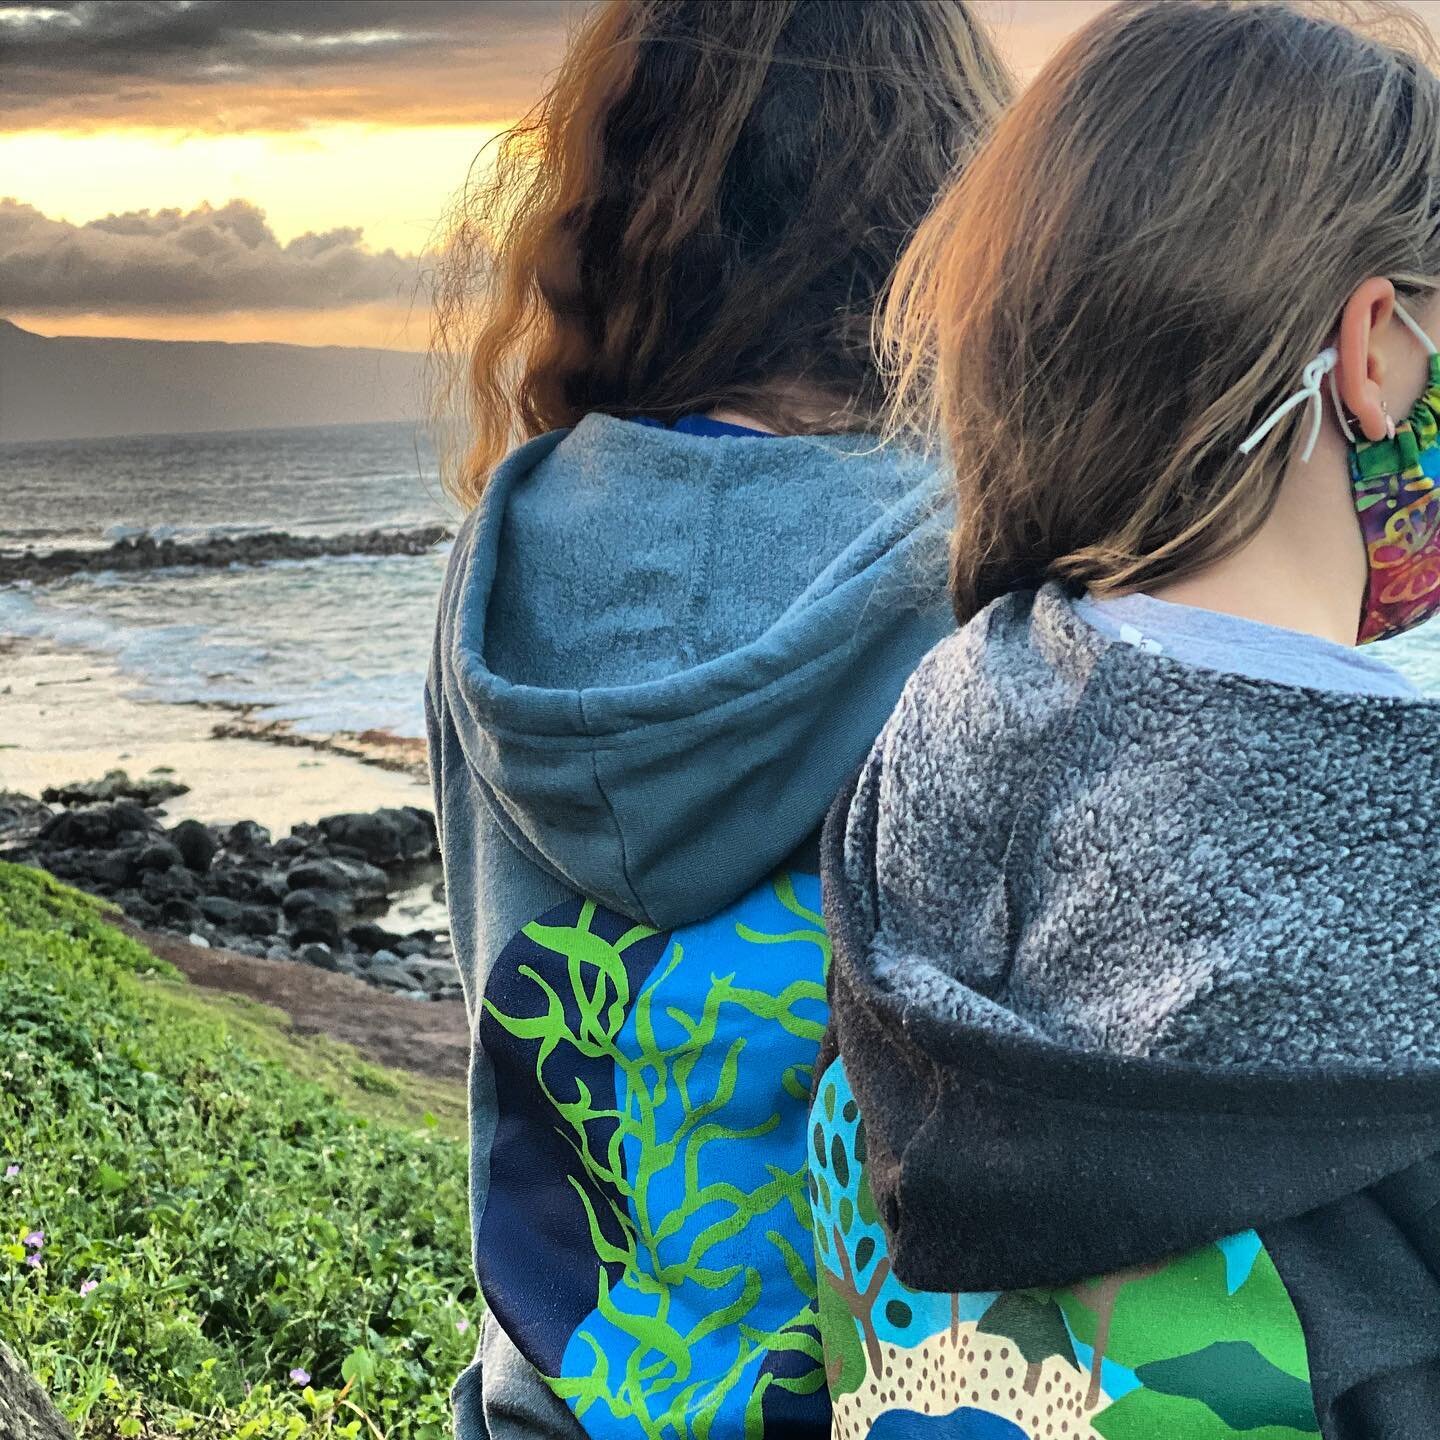 All the way from Hawaii! We love when friends #wearreallife and share photos from all over the USA! 

#clothesthatdogood #makeanimpact #hawaiiansunset #oceanview #letsscuba #lakelife #hoodiestyle #kidco #travelgram #projectaware #americaneaglefoundat